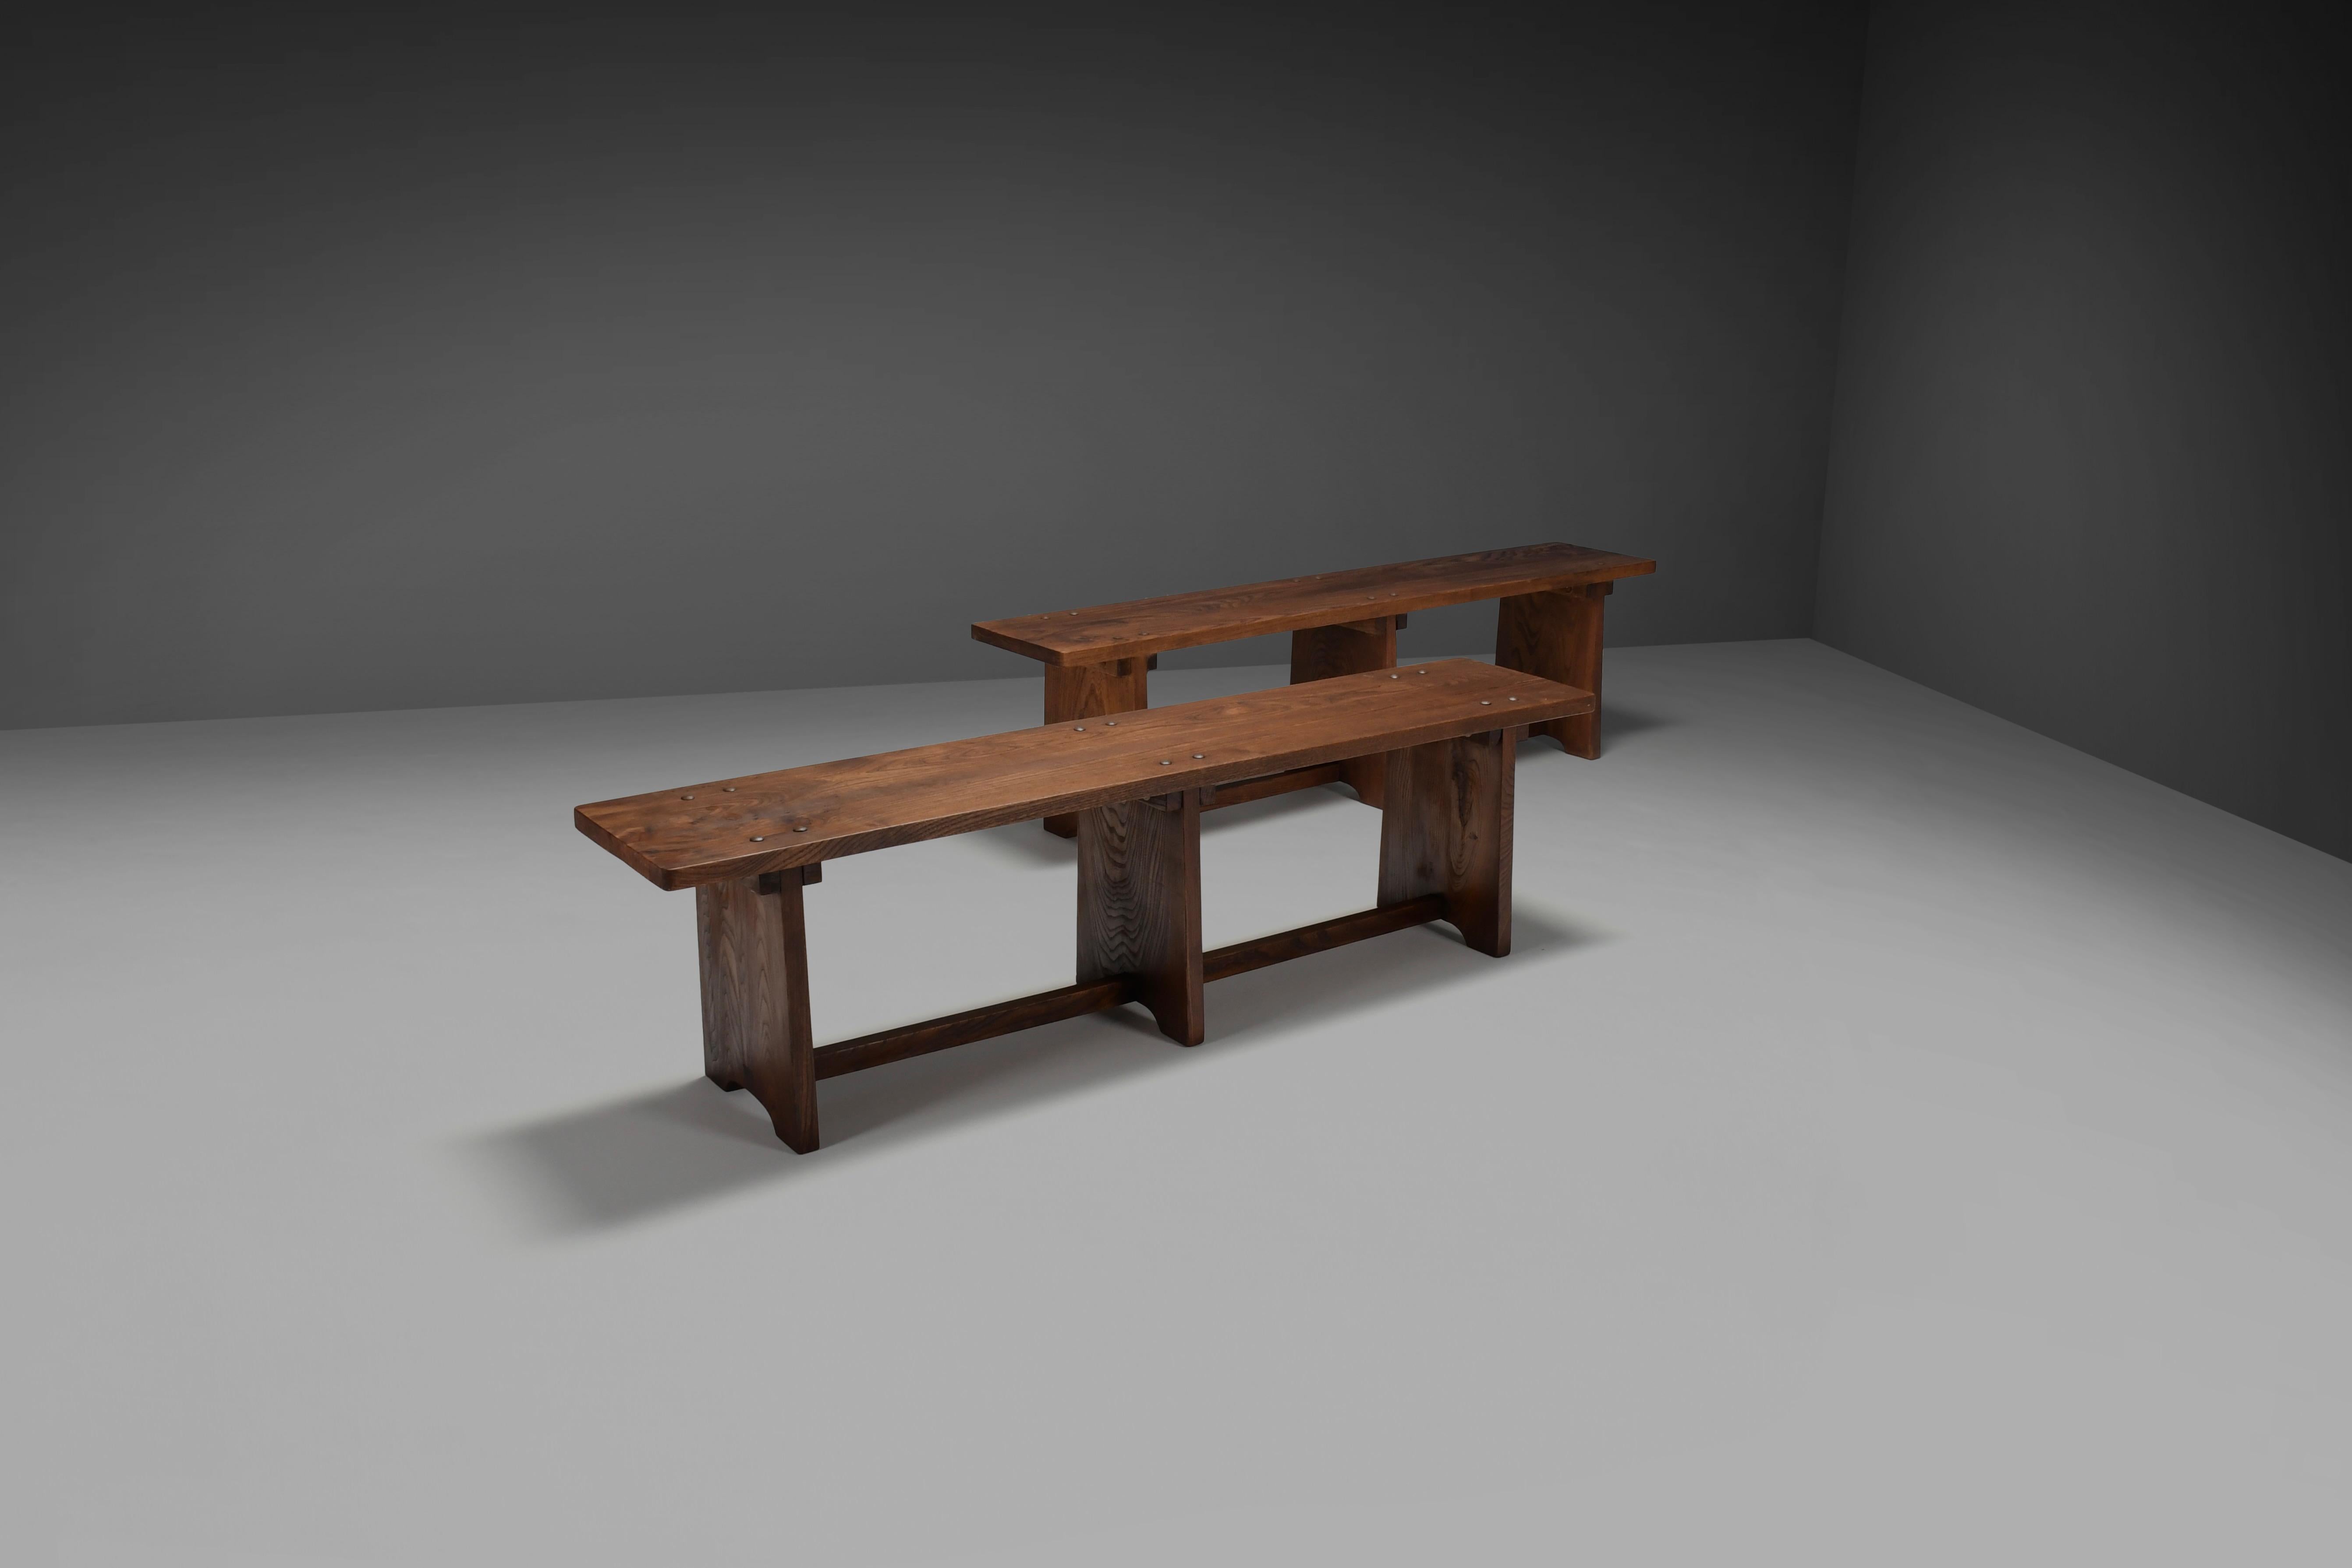 Set of impressive artisan benches in very good original condition.

These benches are made of a beautiful solid elm wood in a warm dark color.

They show a stunning patina and wood grain which adds to their character.
 
The seat is attached to the